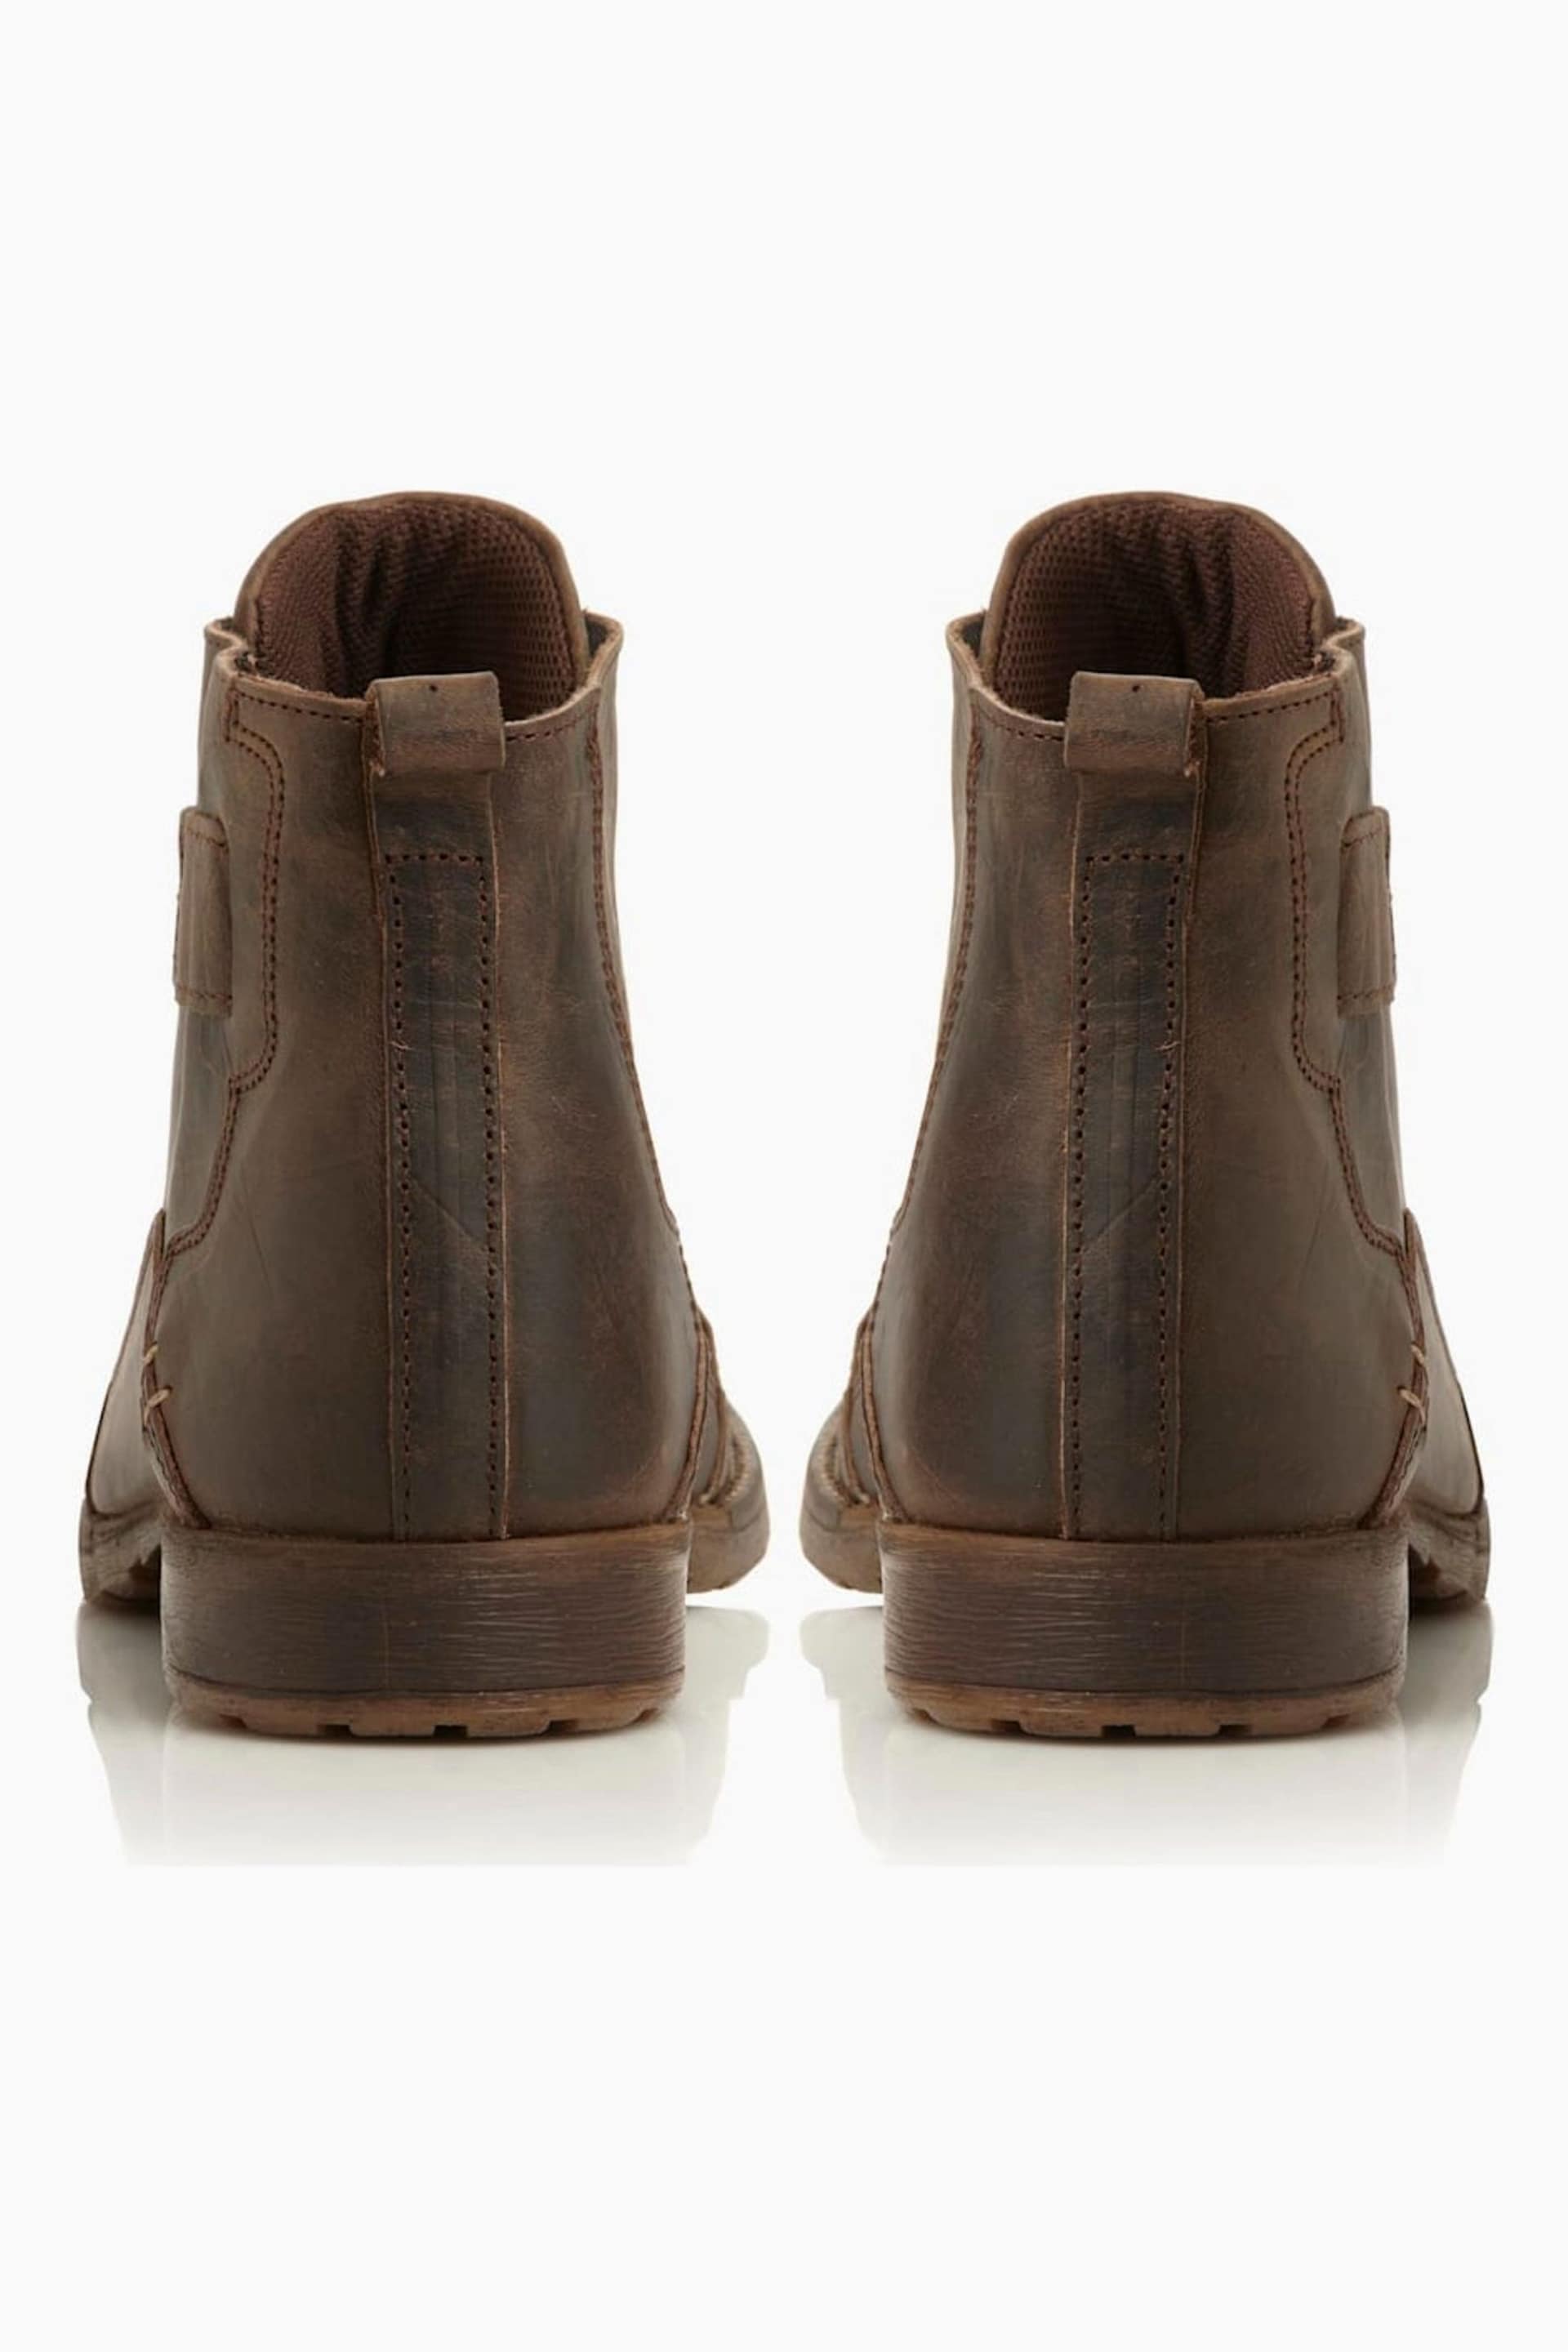 Dune London Brown Heavy Duty Leather Simon Ankle Boots - Image 5 of 7